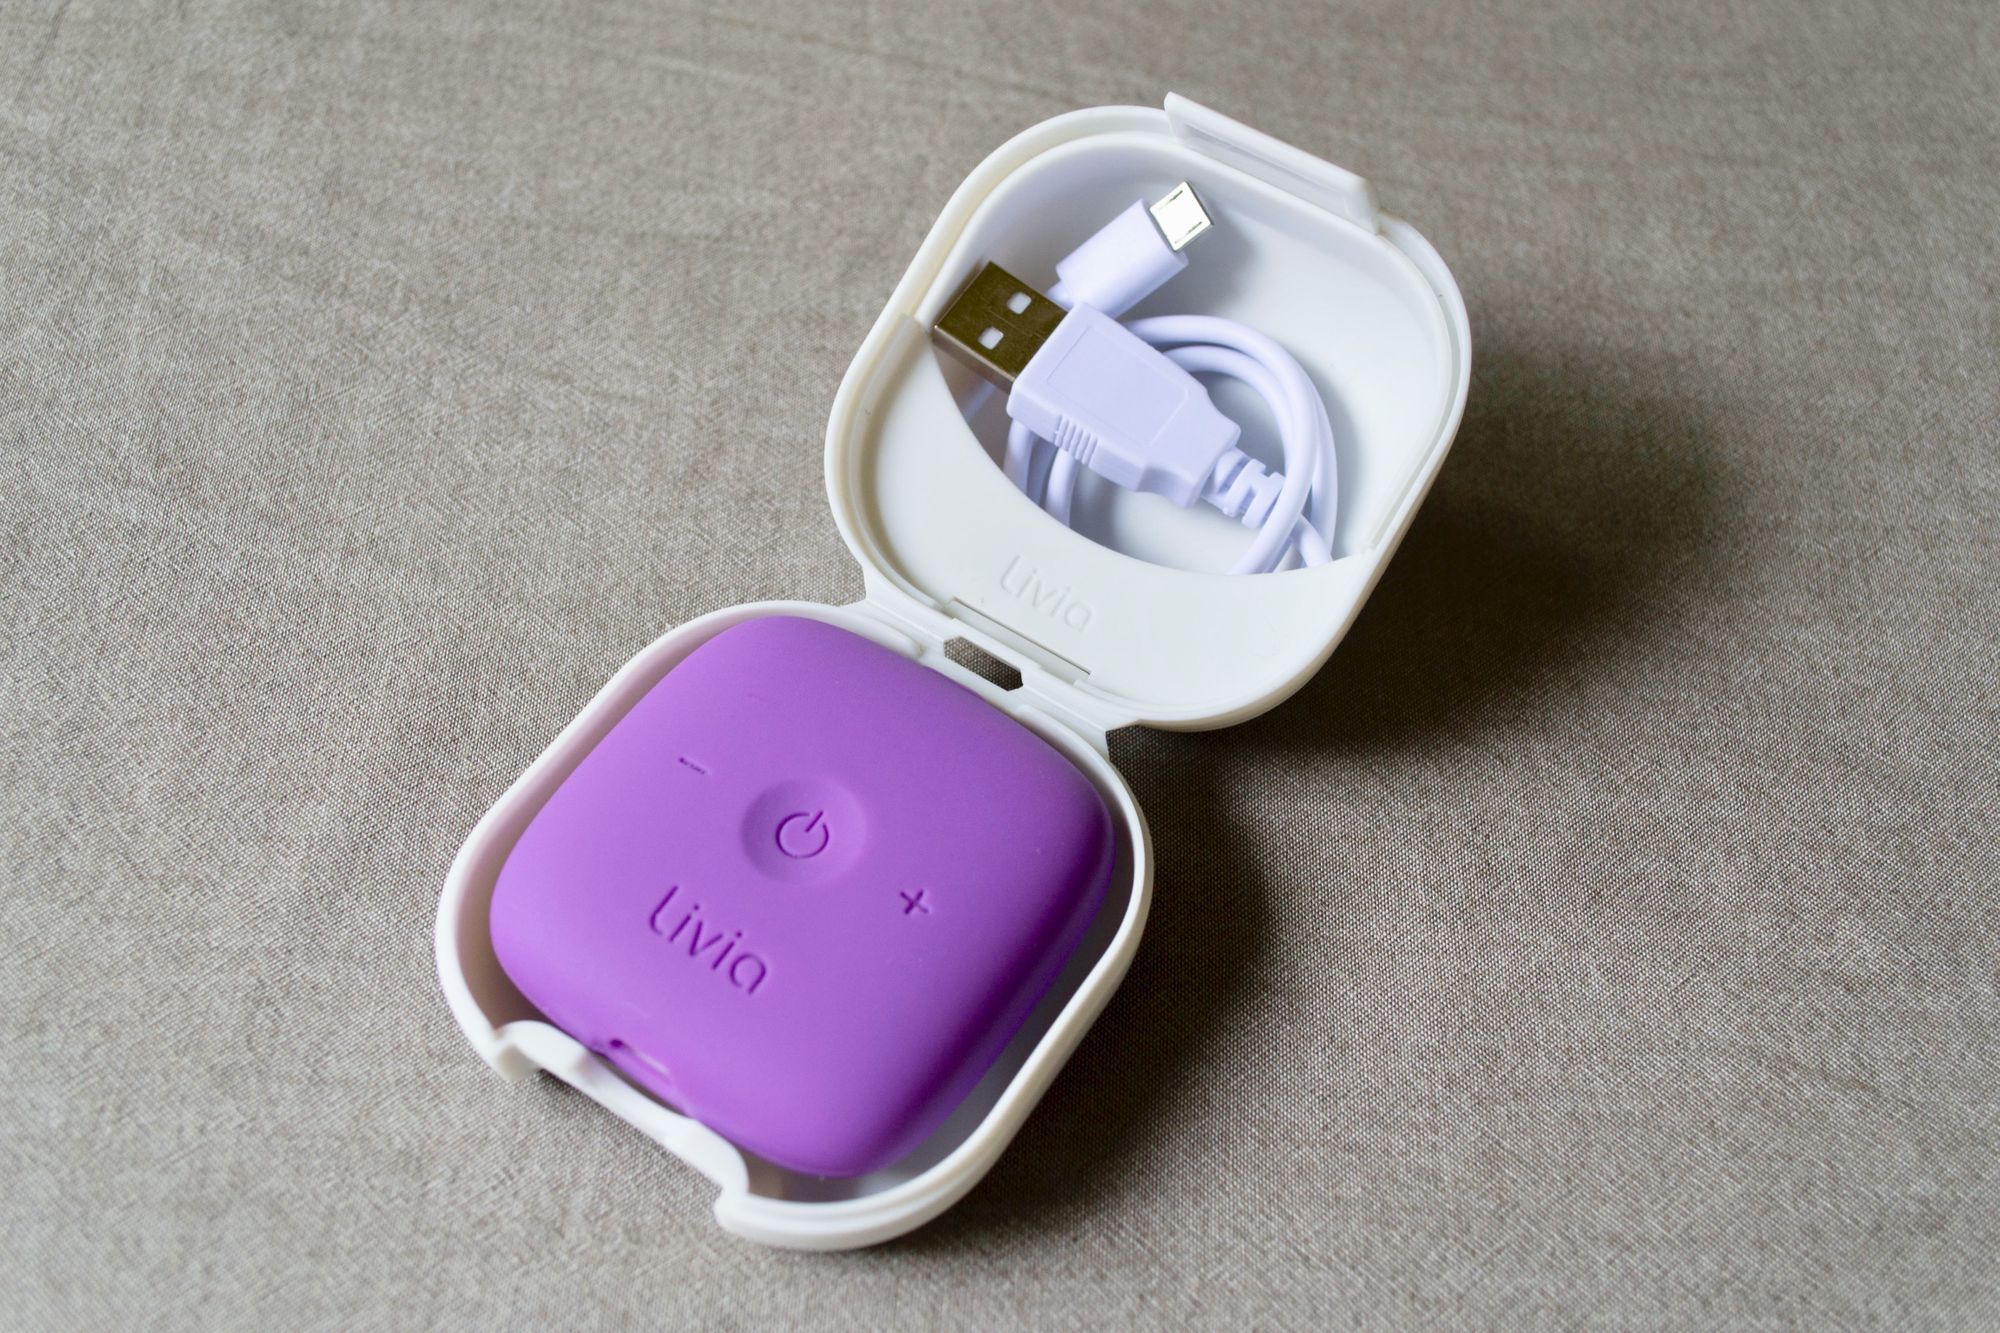 Livia Wearable Period Pain Device Review